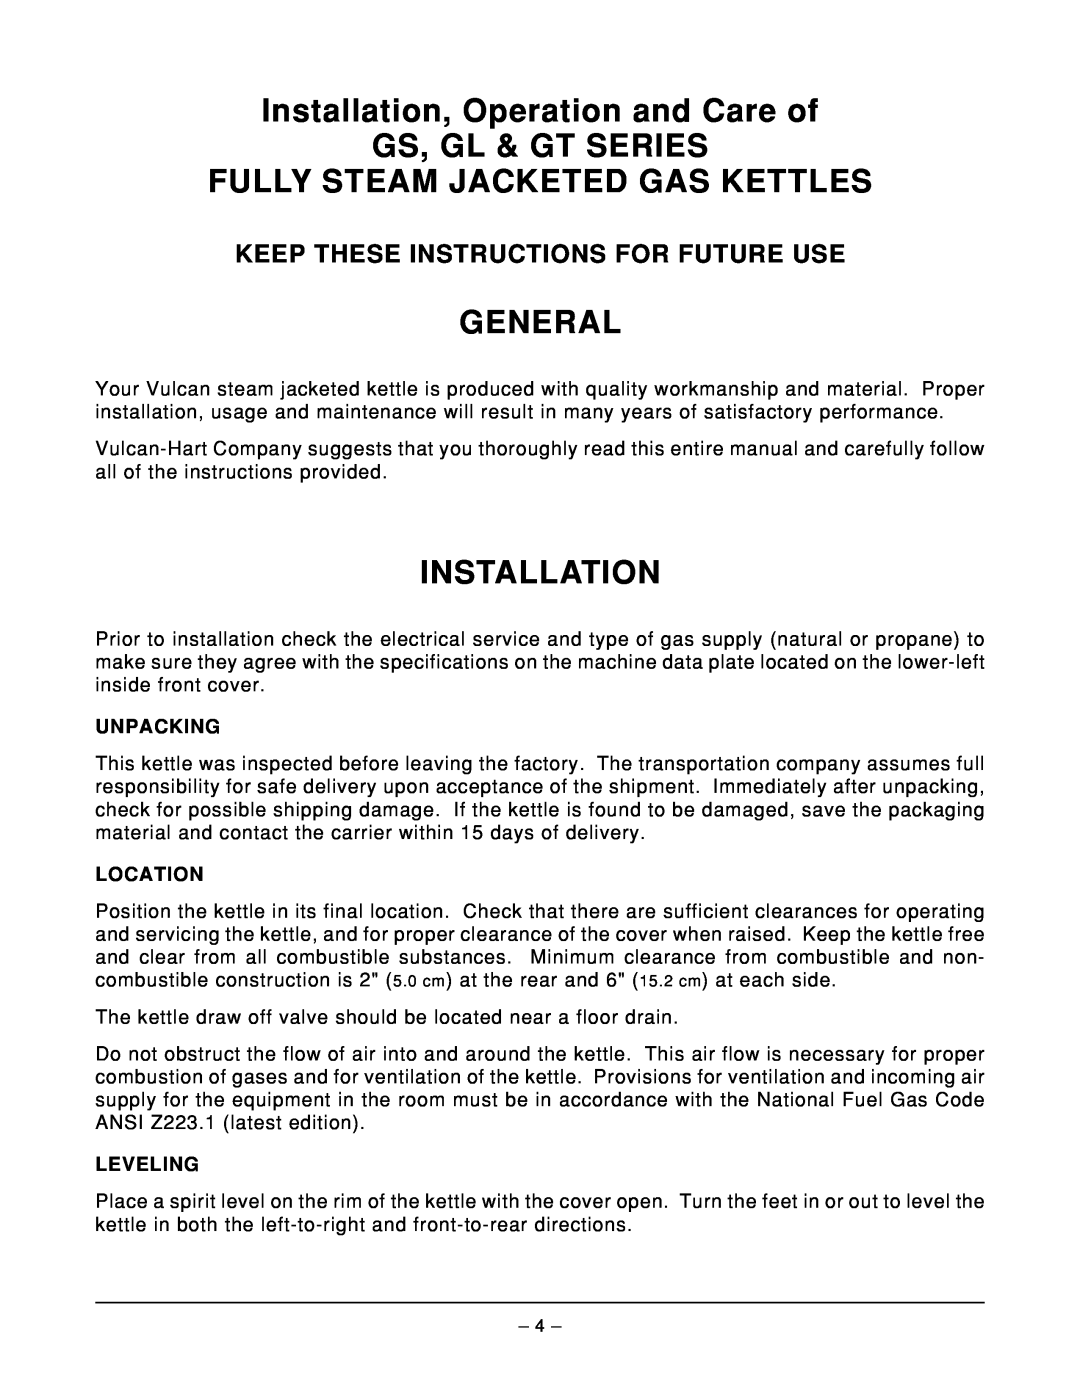 Vulcan-Hart GS25E ML-52633 Installation, Operation and Care of GS, GL & GT SERIES, Fully Steam Jacketed Gas Kettles 